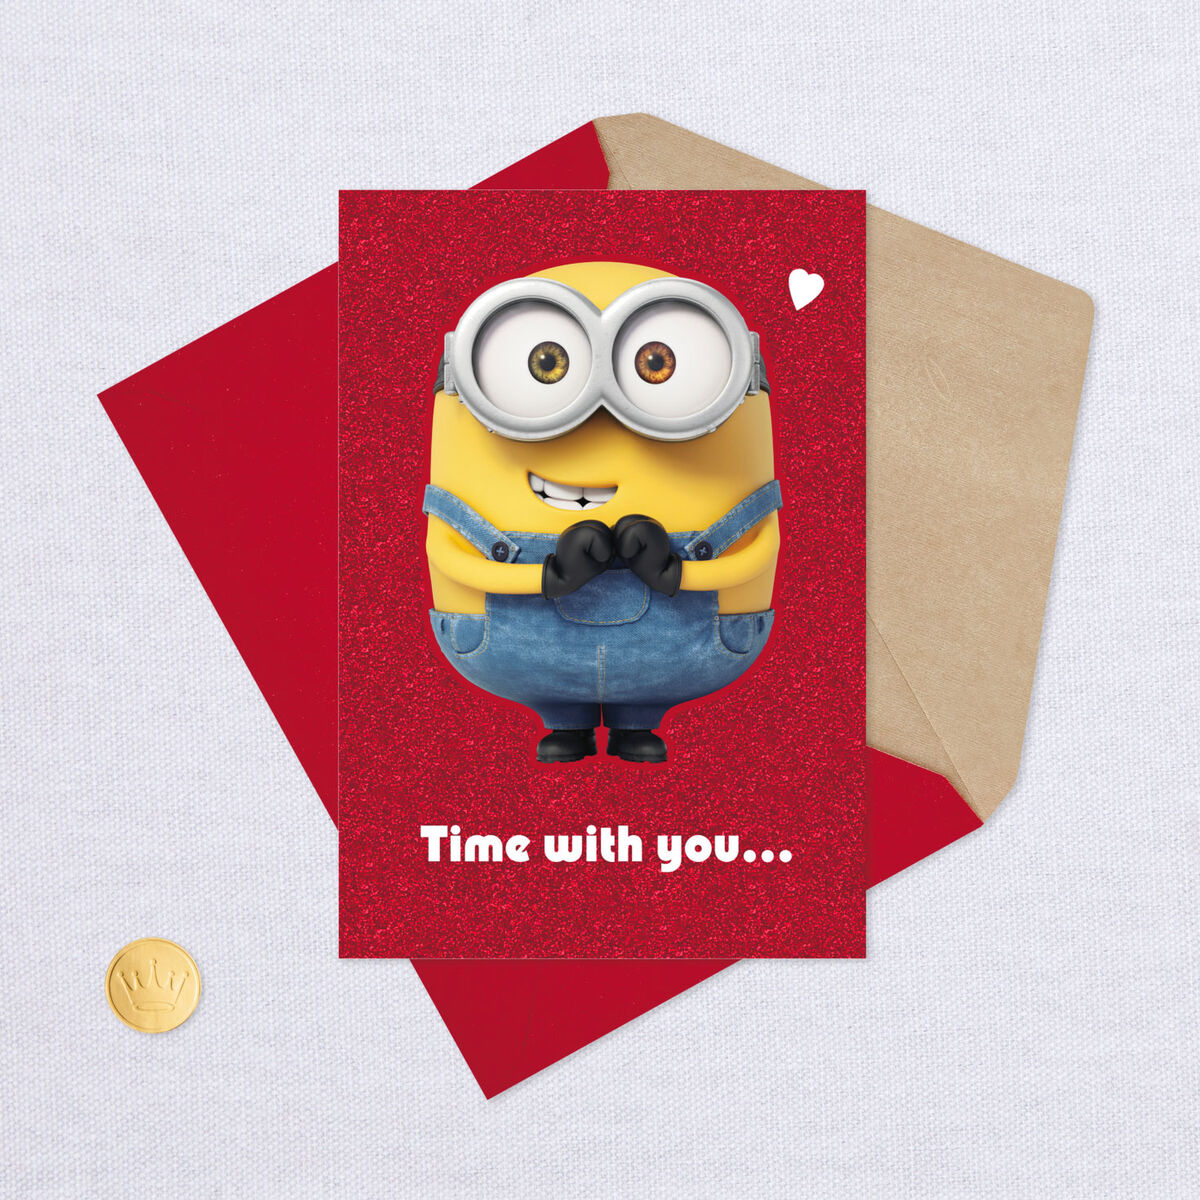 despicable-me-minion-sweet-valentine-s-day-card-greeting-cards-hallmark